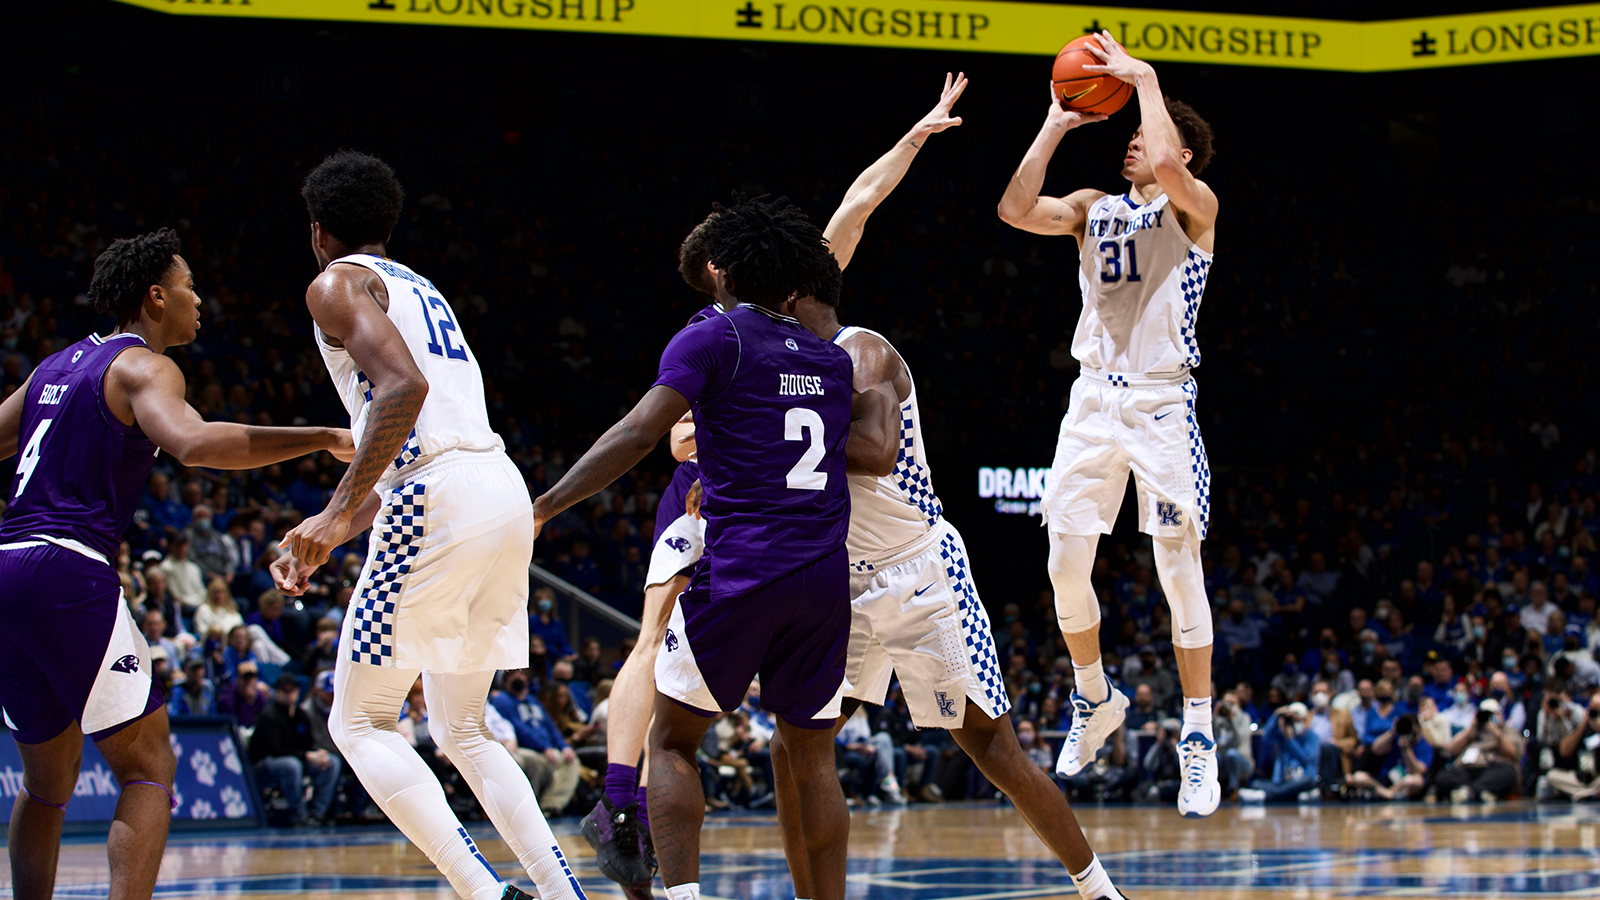 No. 18 Kentucky Cruises Past High Point